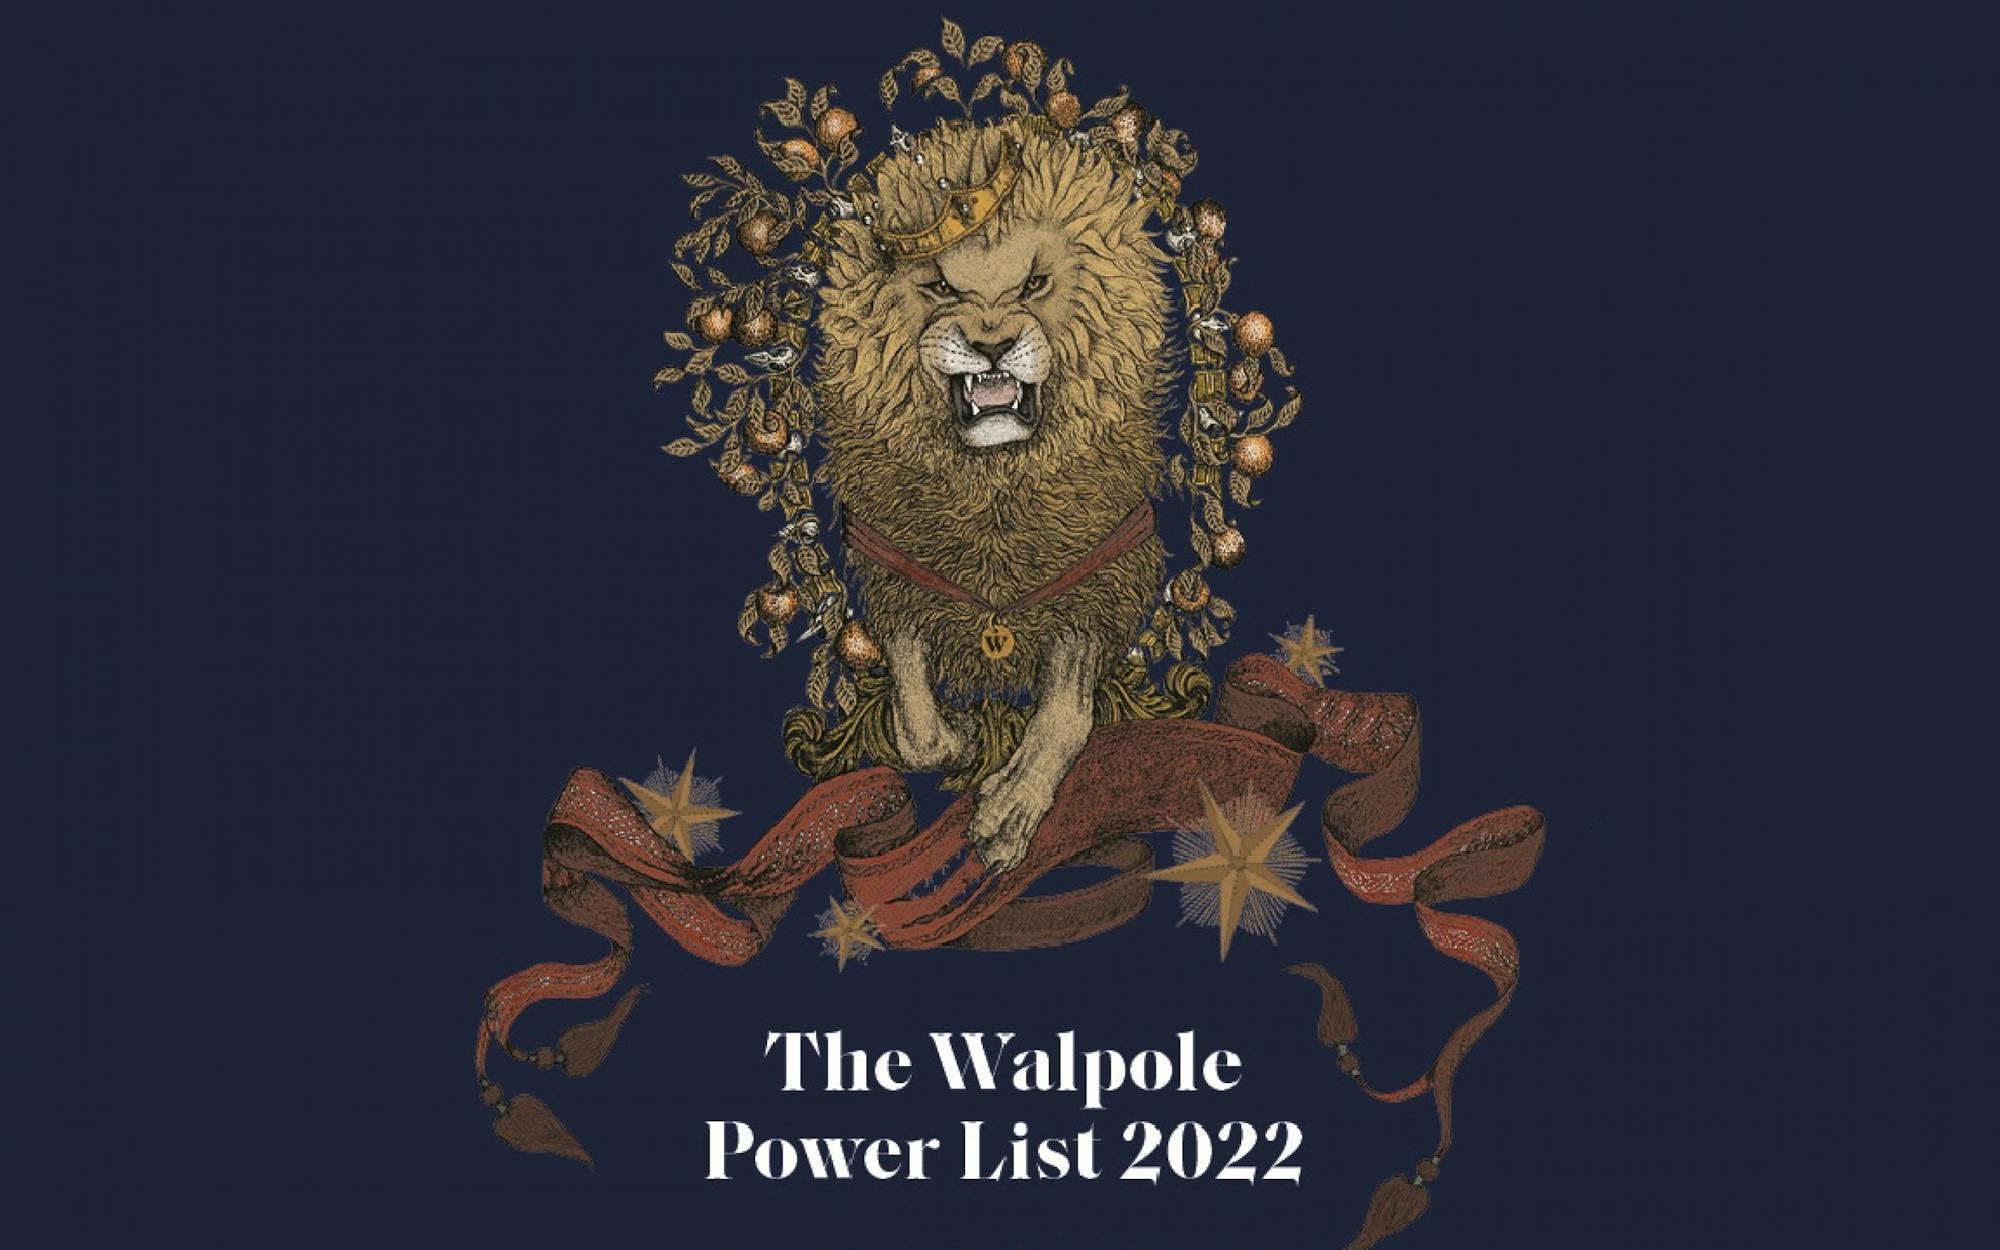 The Walpole Power List 2022 The 50 Most Influential People in British Luxury 